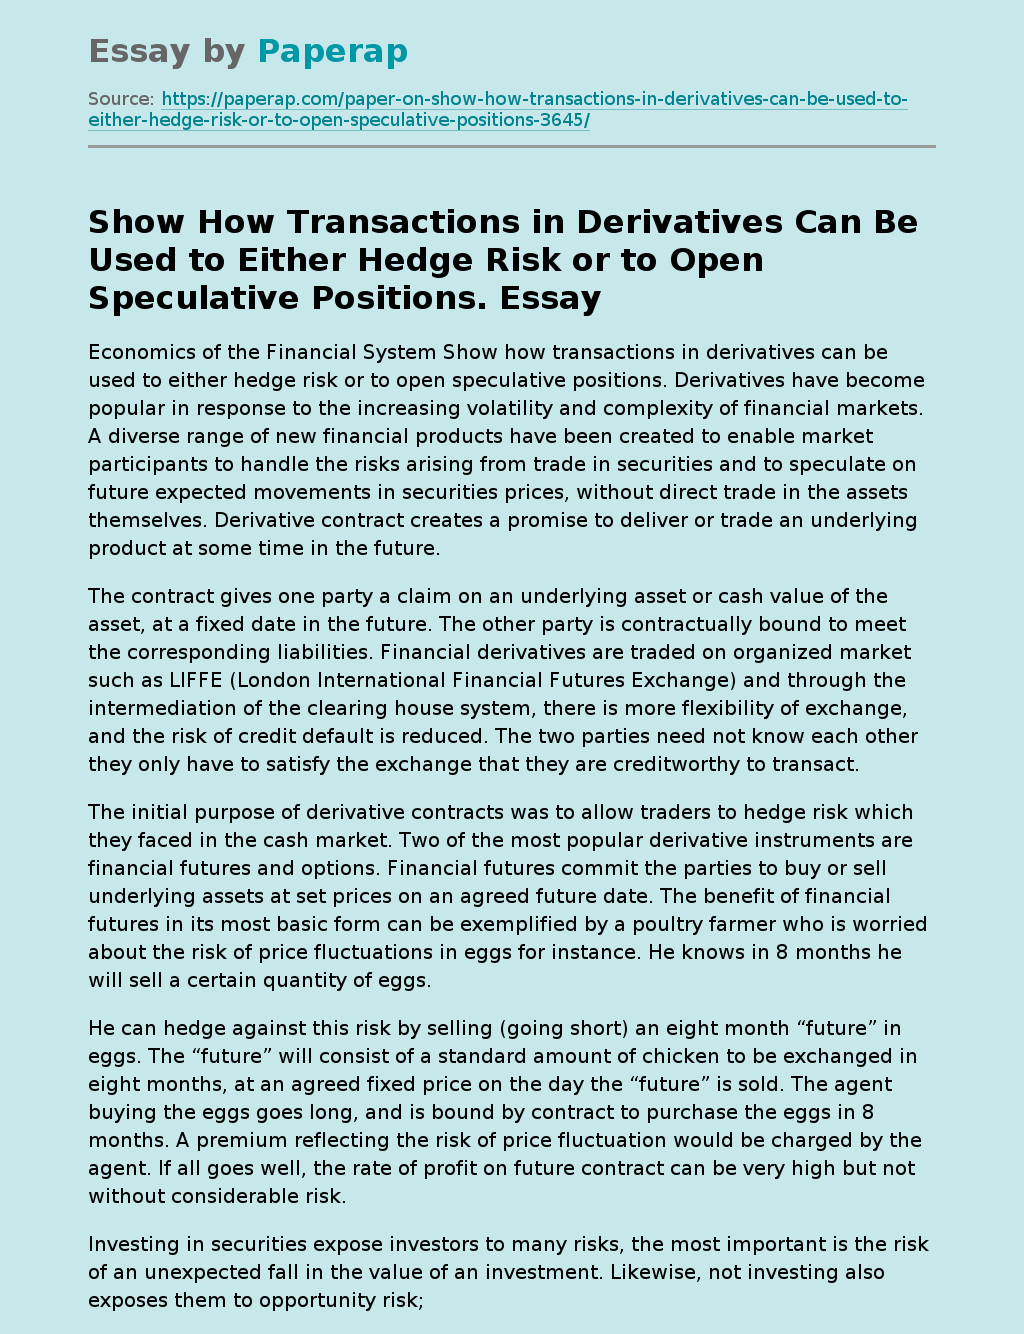 Show How Transactions in Derivatives Can Be Used to Either Hedge Risk or to Open Speculative Positions.